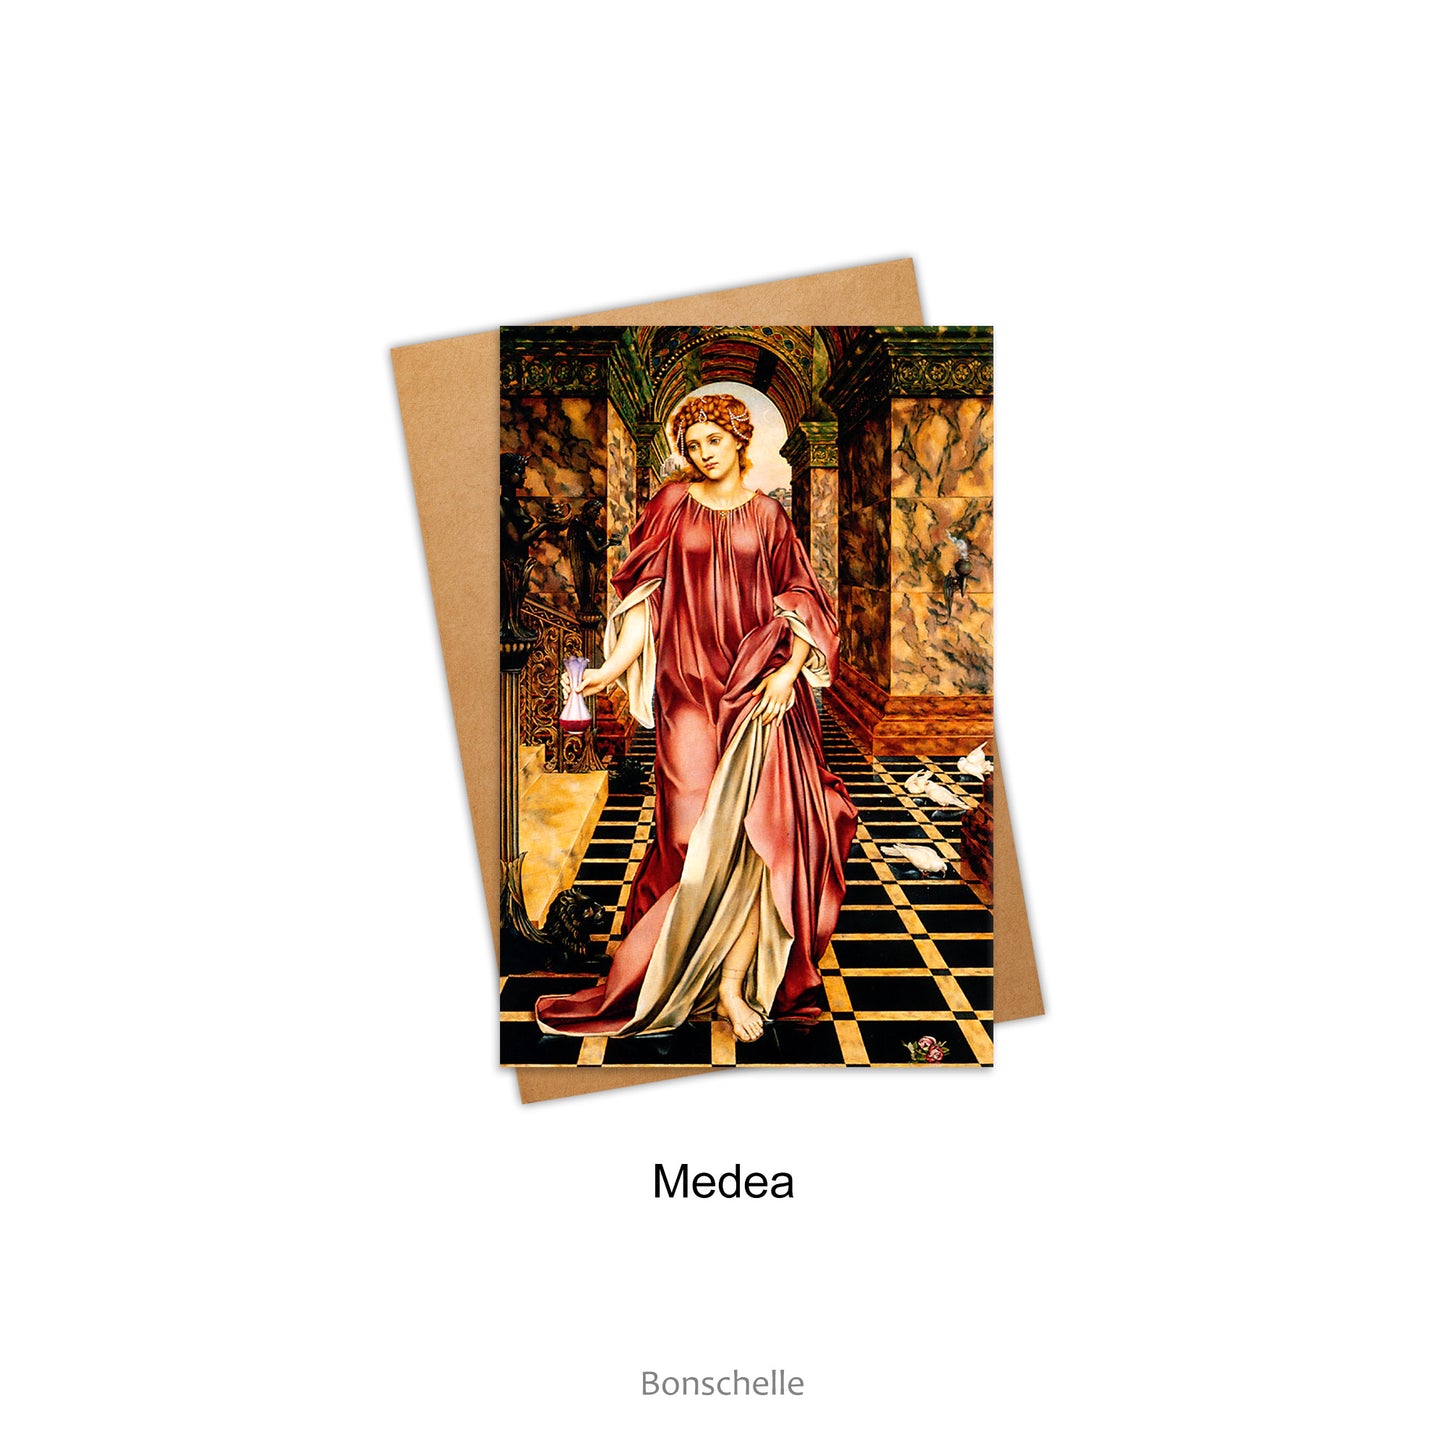 Card and envelope with the image of 'Medea' from Greek Mythology by Pre-Raphaelite artist, Evelyn De Morgan (1855–1919).